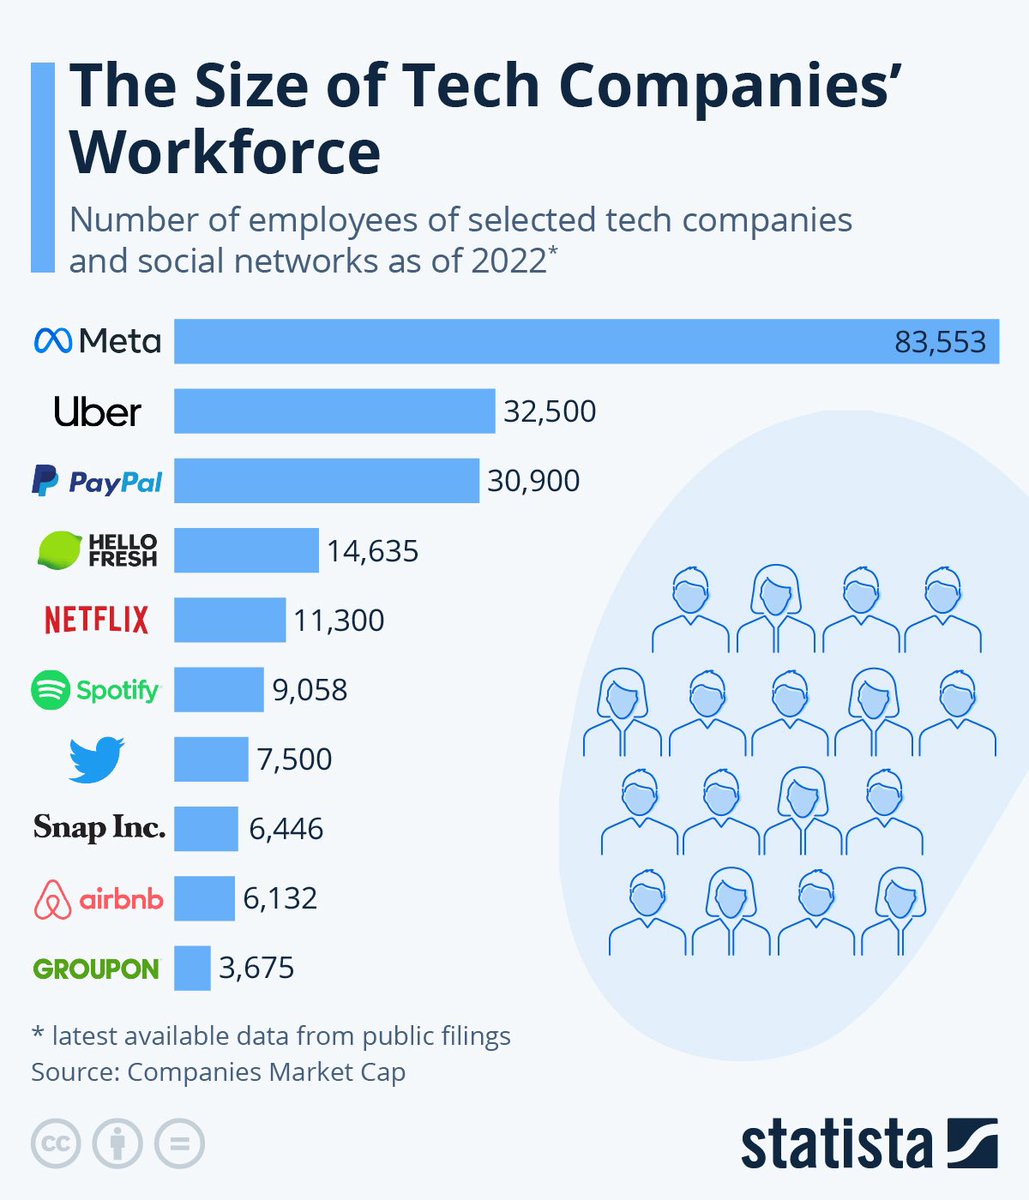 #Infographic 👌: The Size of #Tech Companies' Workforce 🔗👉 bit.ly/3D9J8PX via @StatistaCharts 📌 #SocialMedia #Meta #payments #svod #streaming #entertainment #Netflix #Travel #airbnb #Uber #Twitter #Snap #Spotify